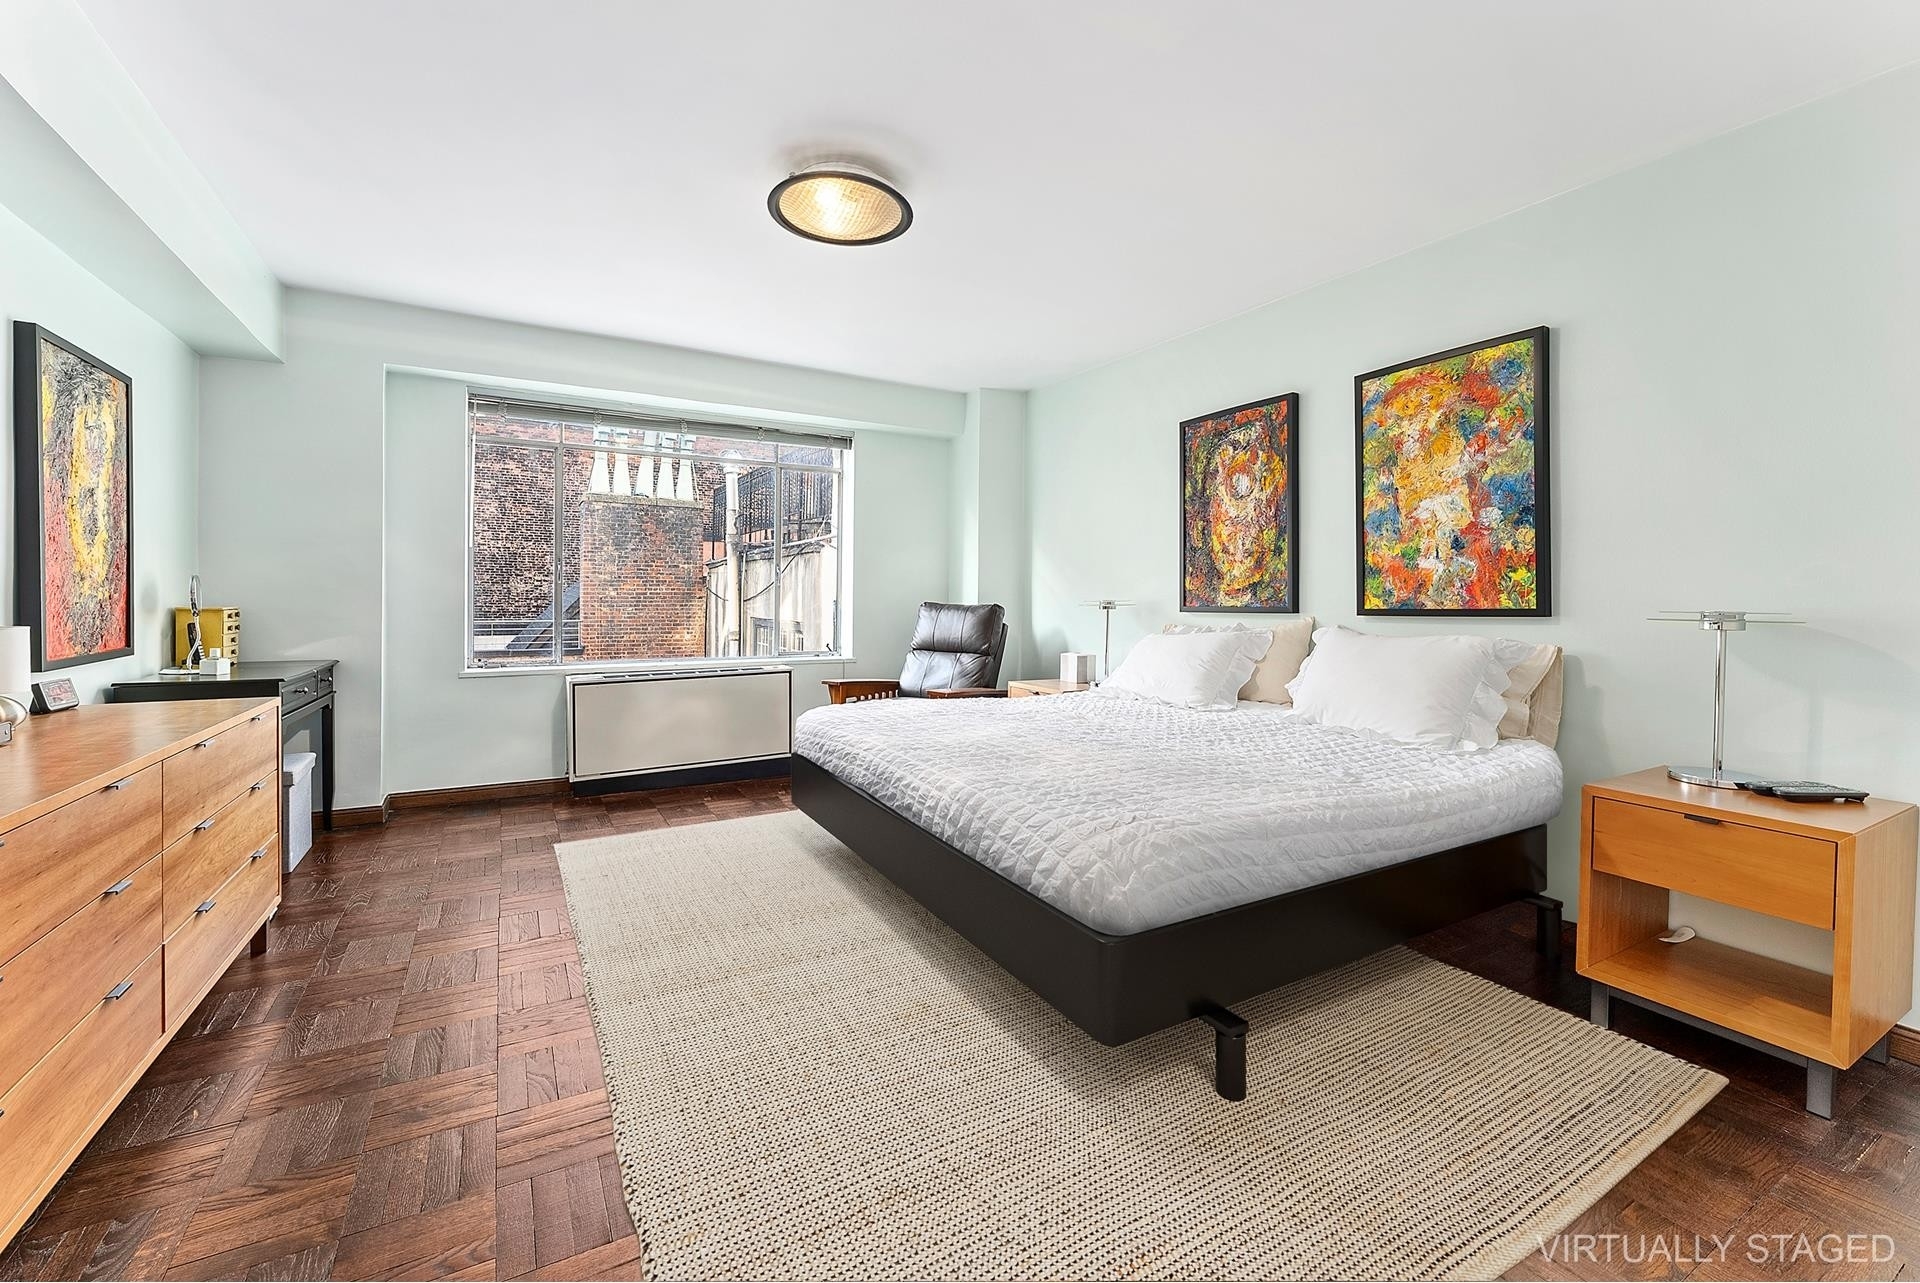 Co-op Properties for Sale at 310 LEXINGTON AVE, 6D Murray Hill, New York, New York 10016